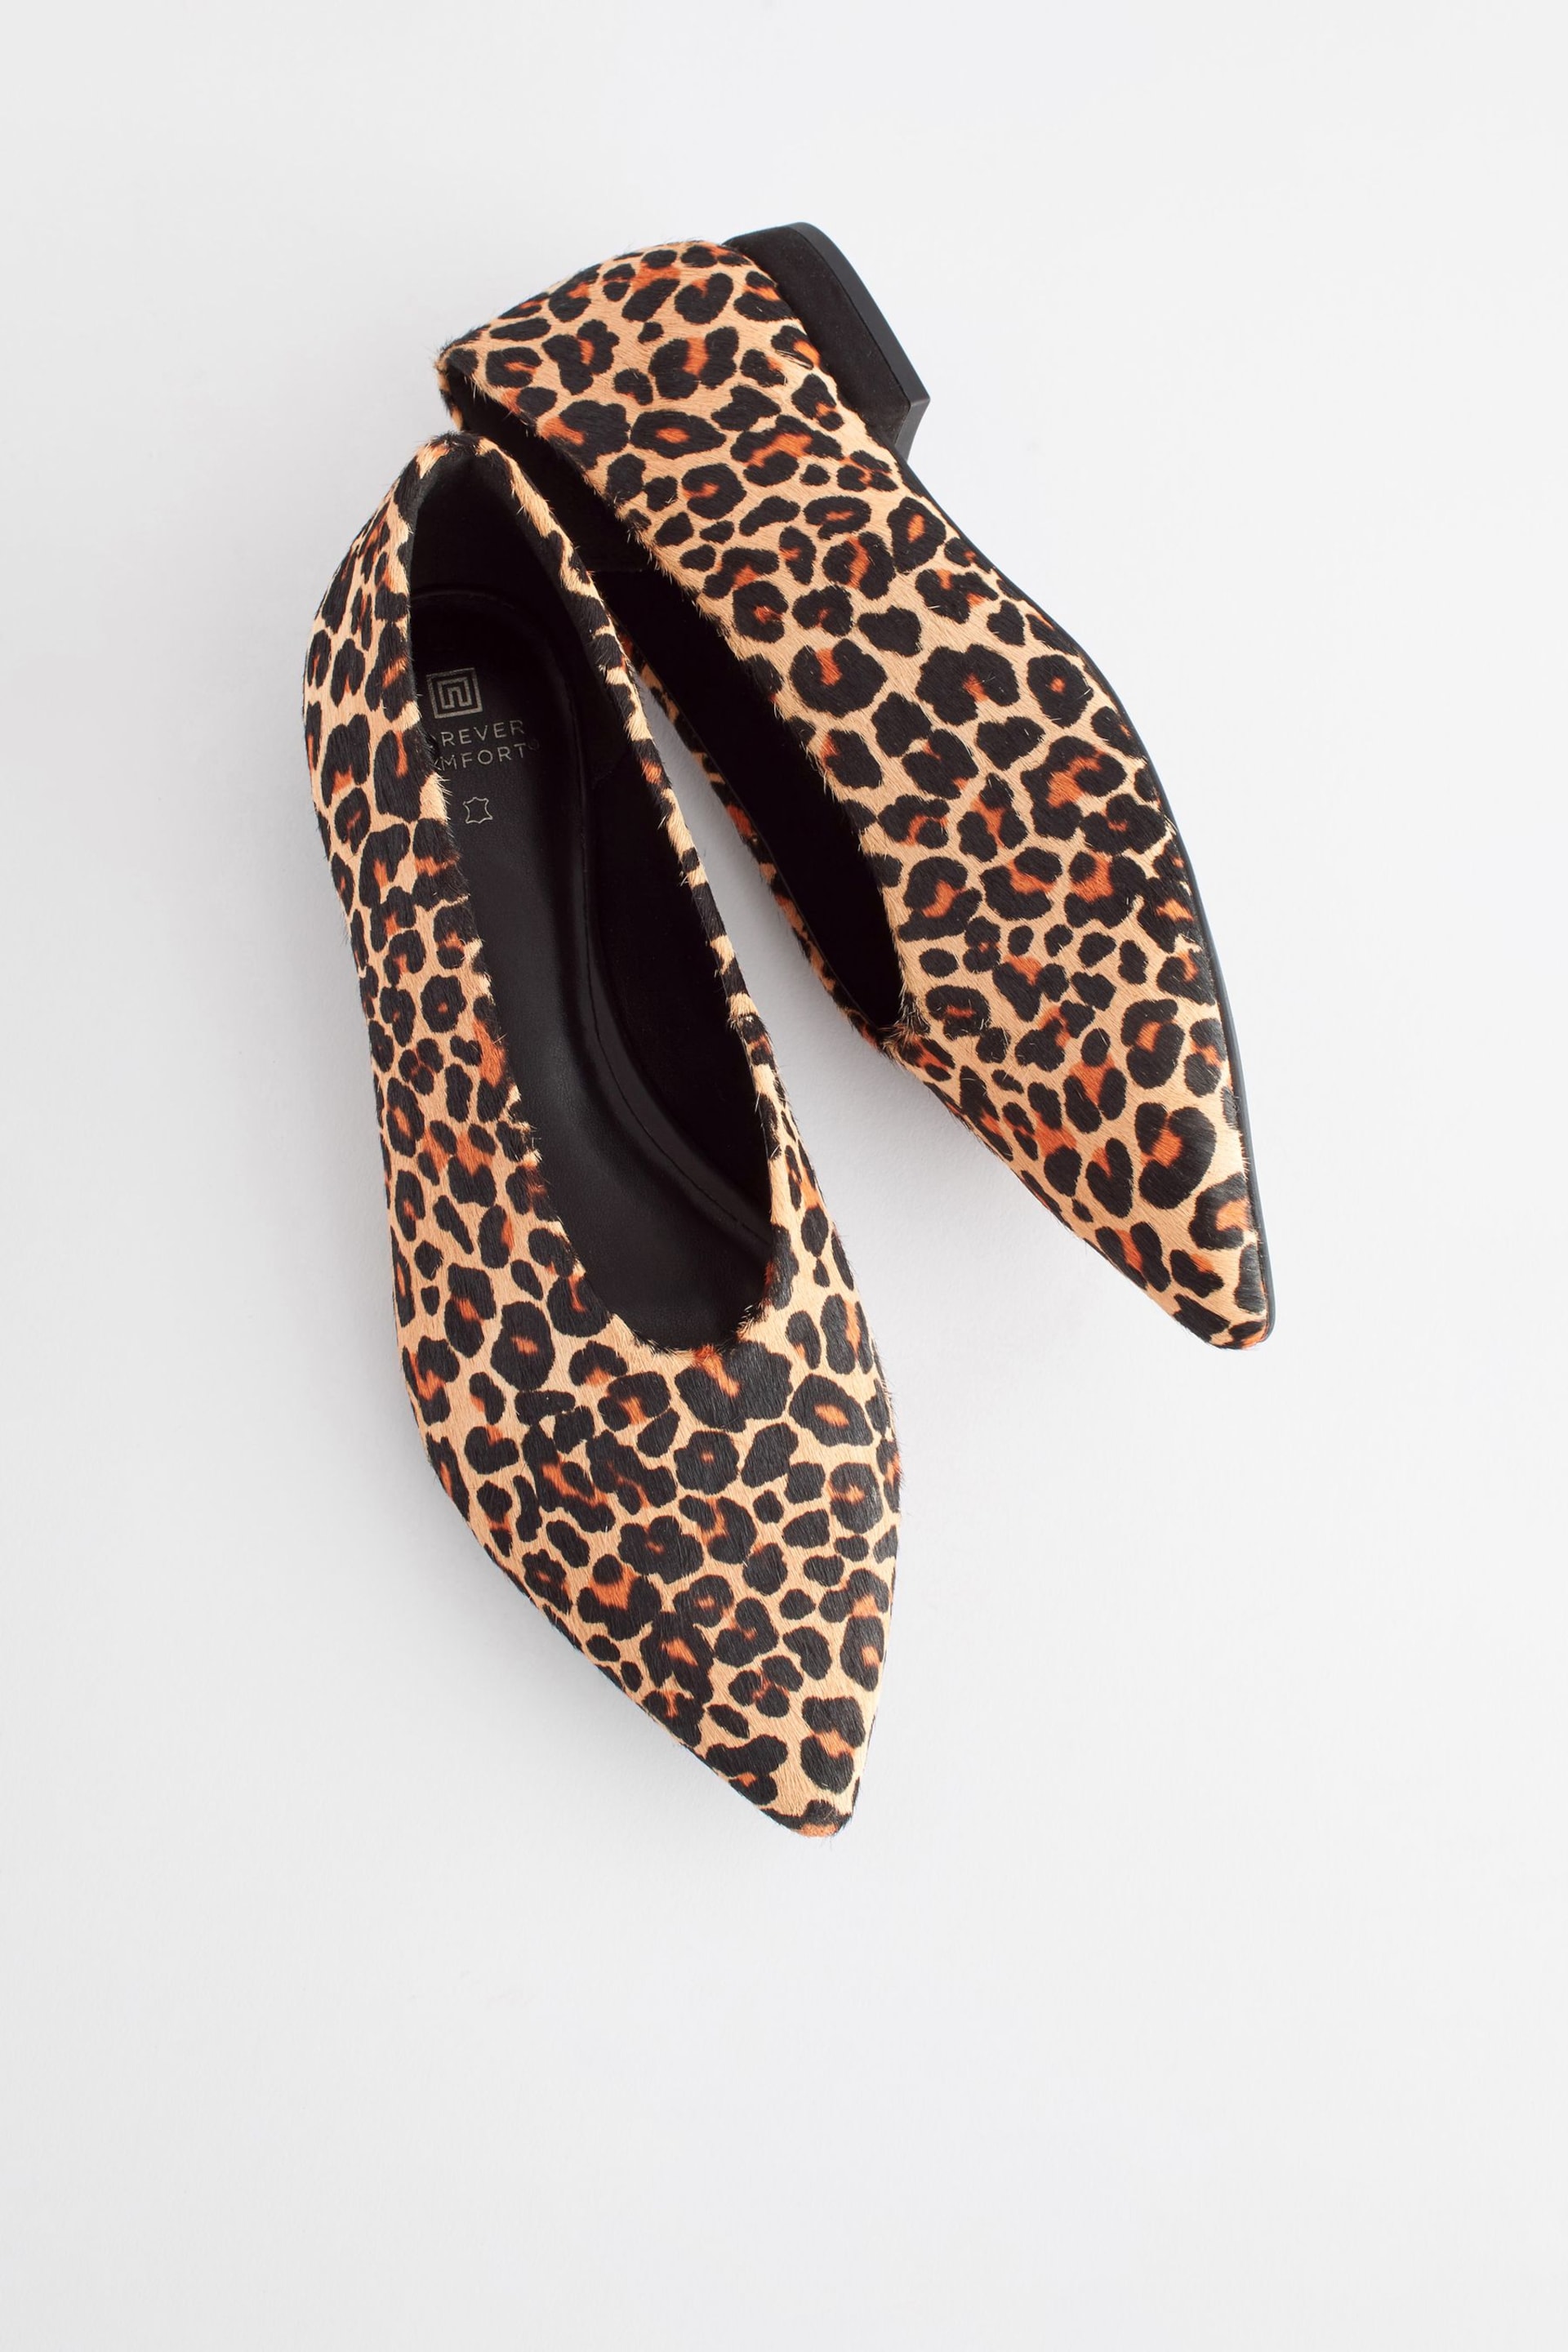 Leopard Forever Comfort® Leather Point Toe Ballerina Shoes - Image 5 of 6